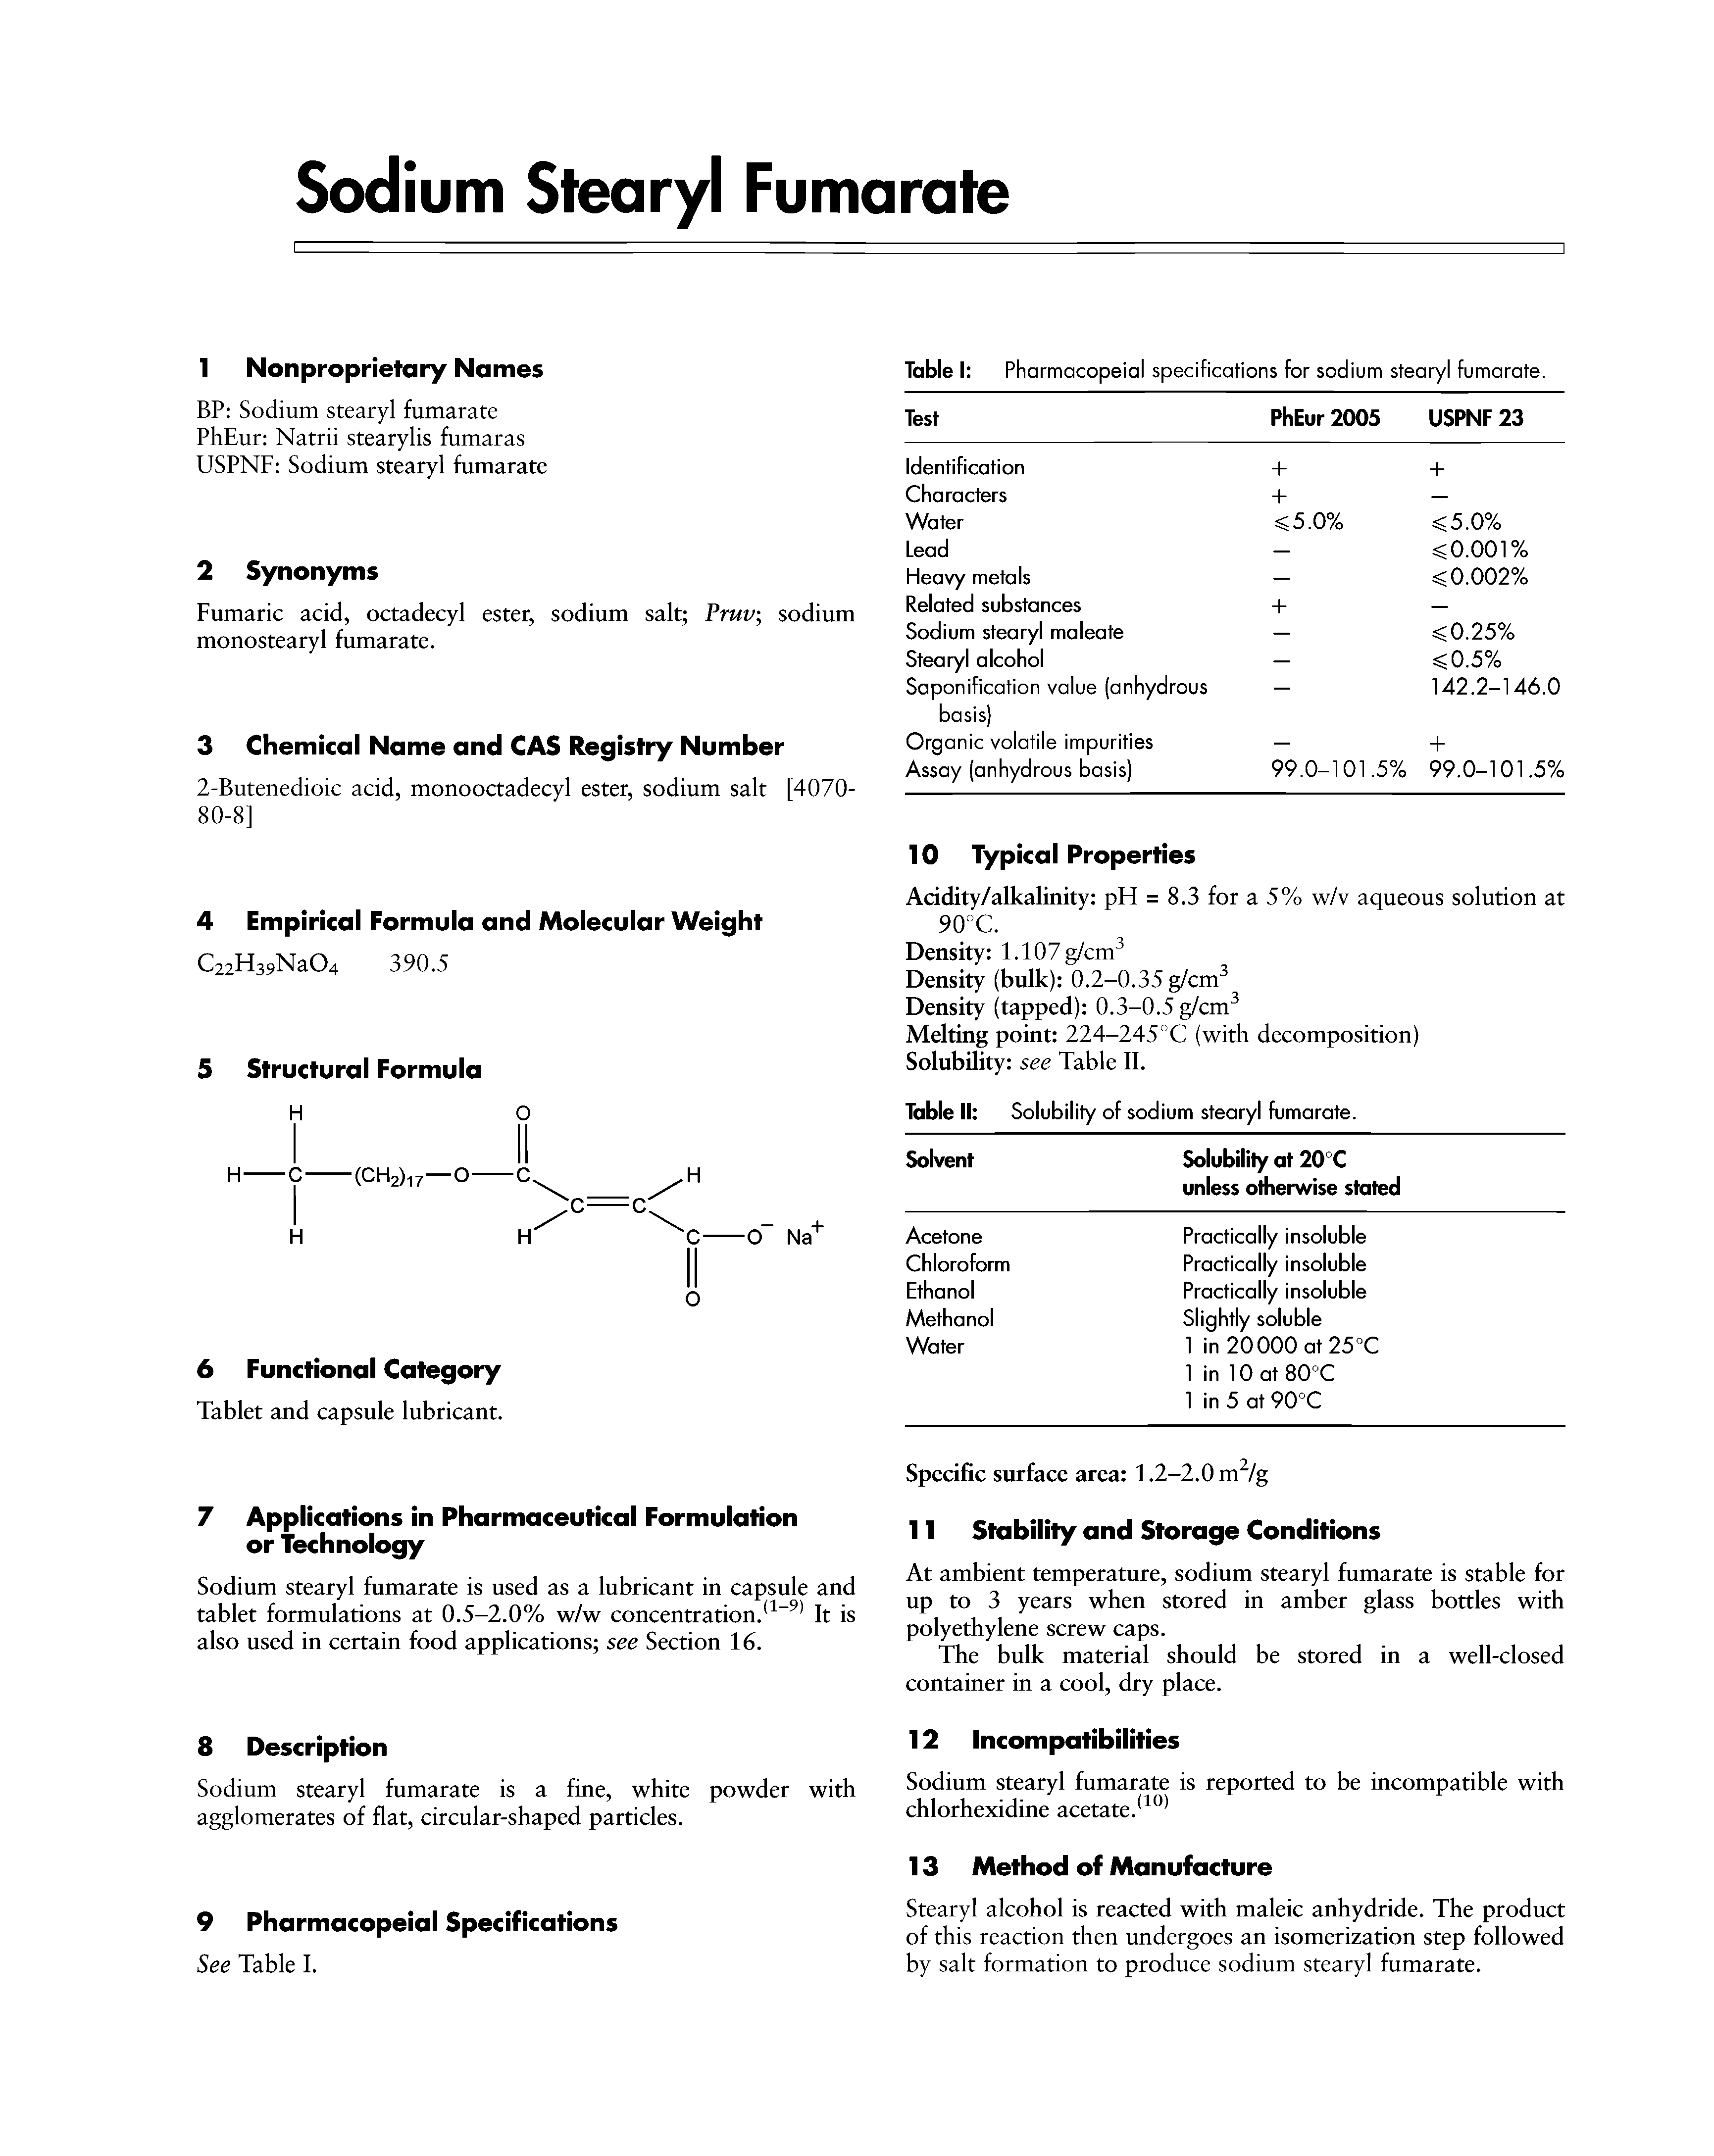 Table I Pharmacopeial specifications for sodium stearyl fumarate.